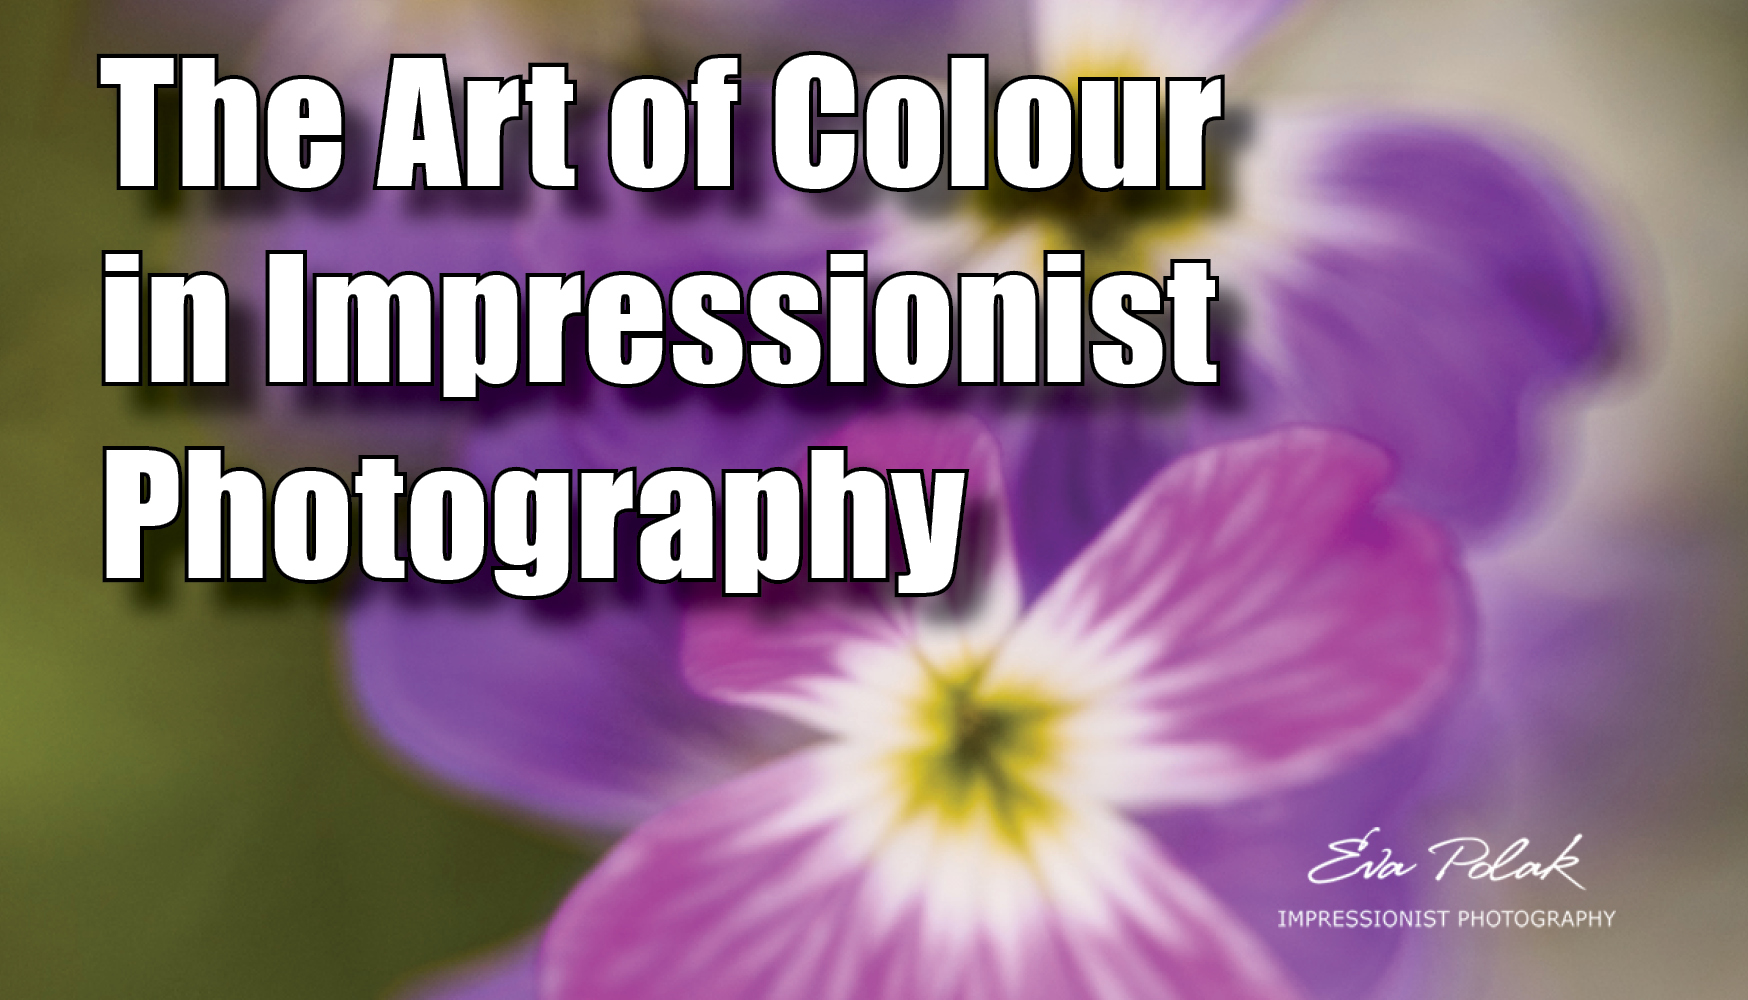 The art of colour in impressionist photography